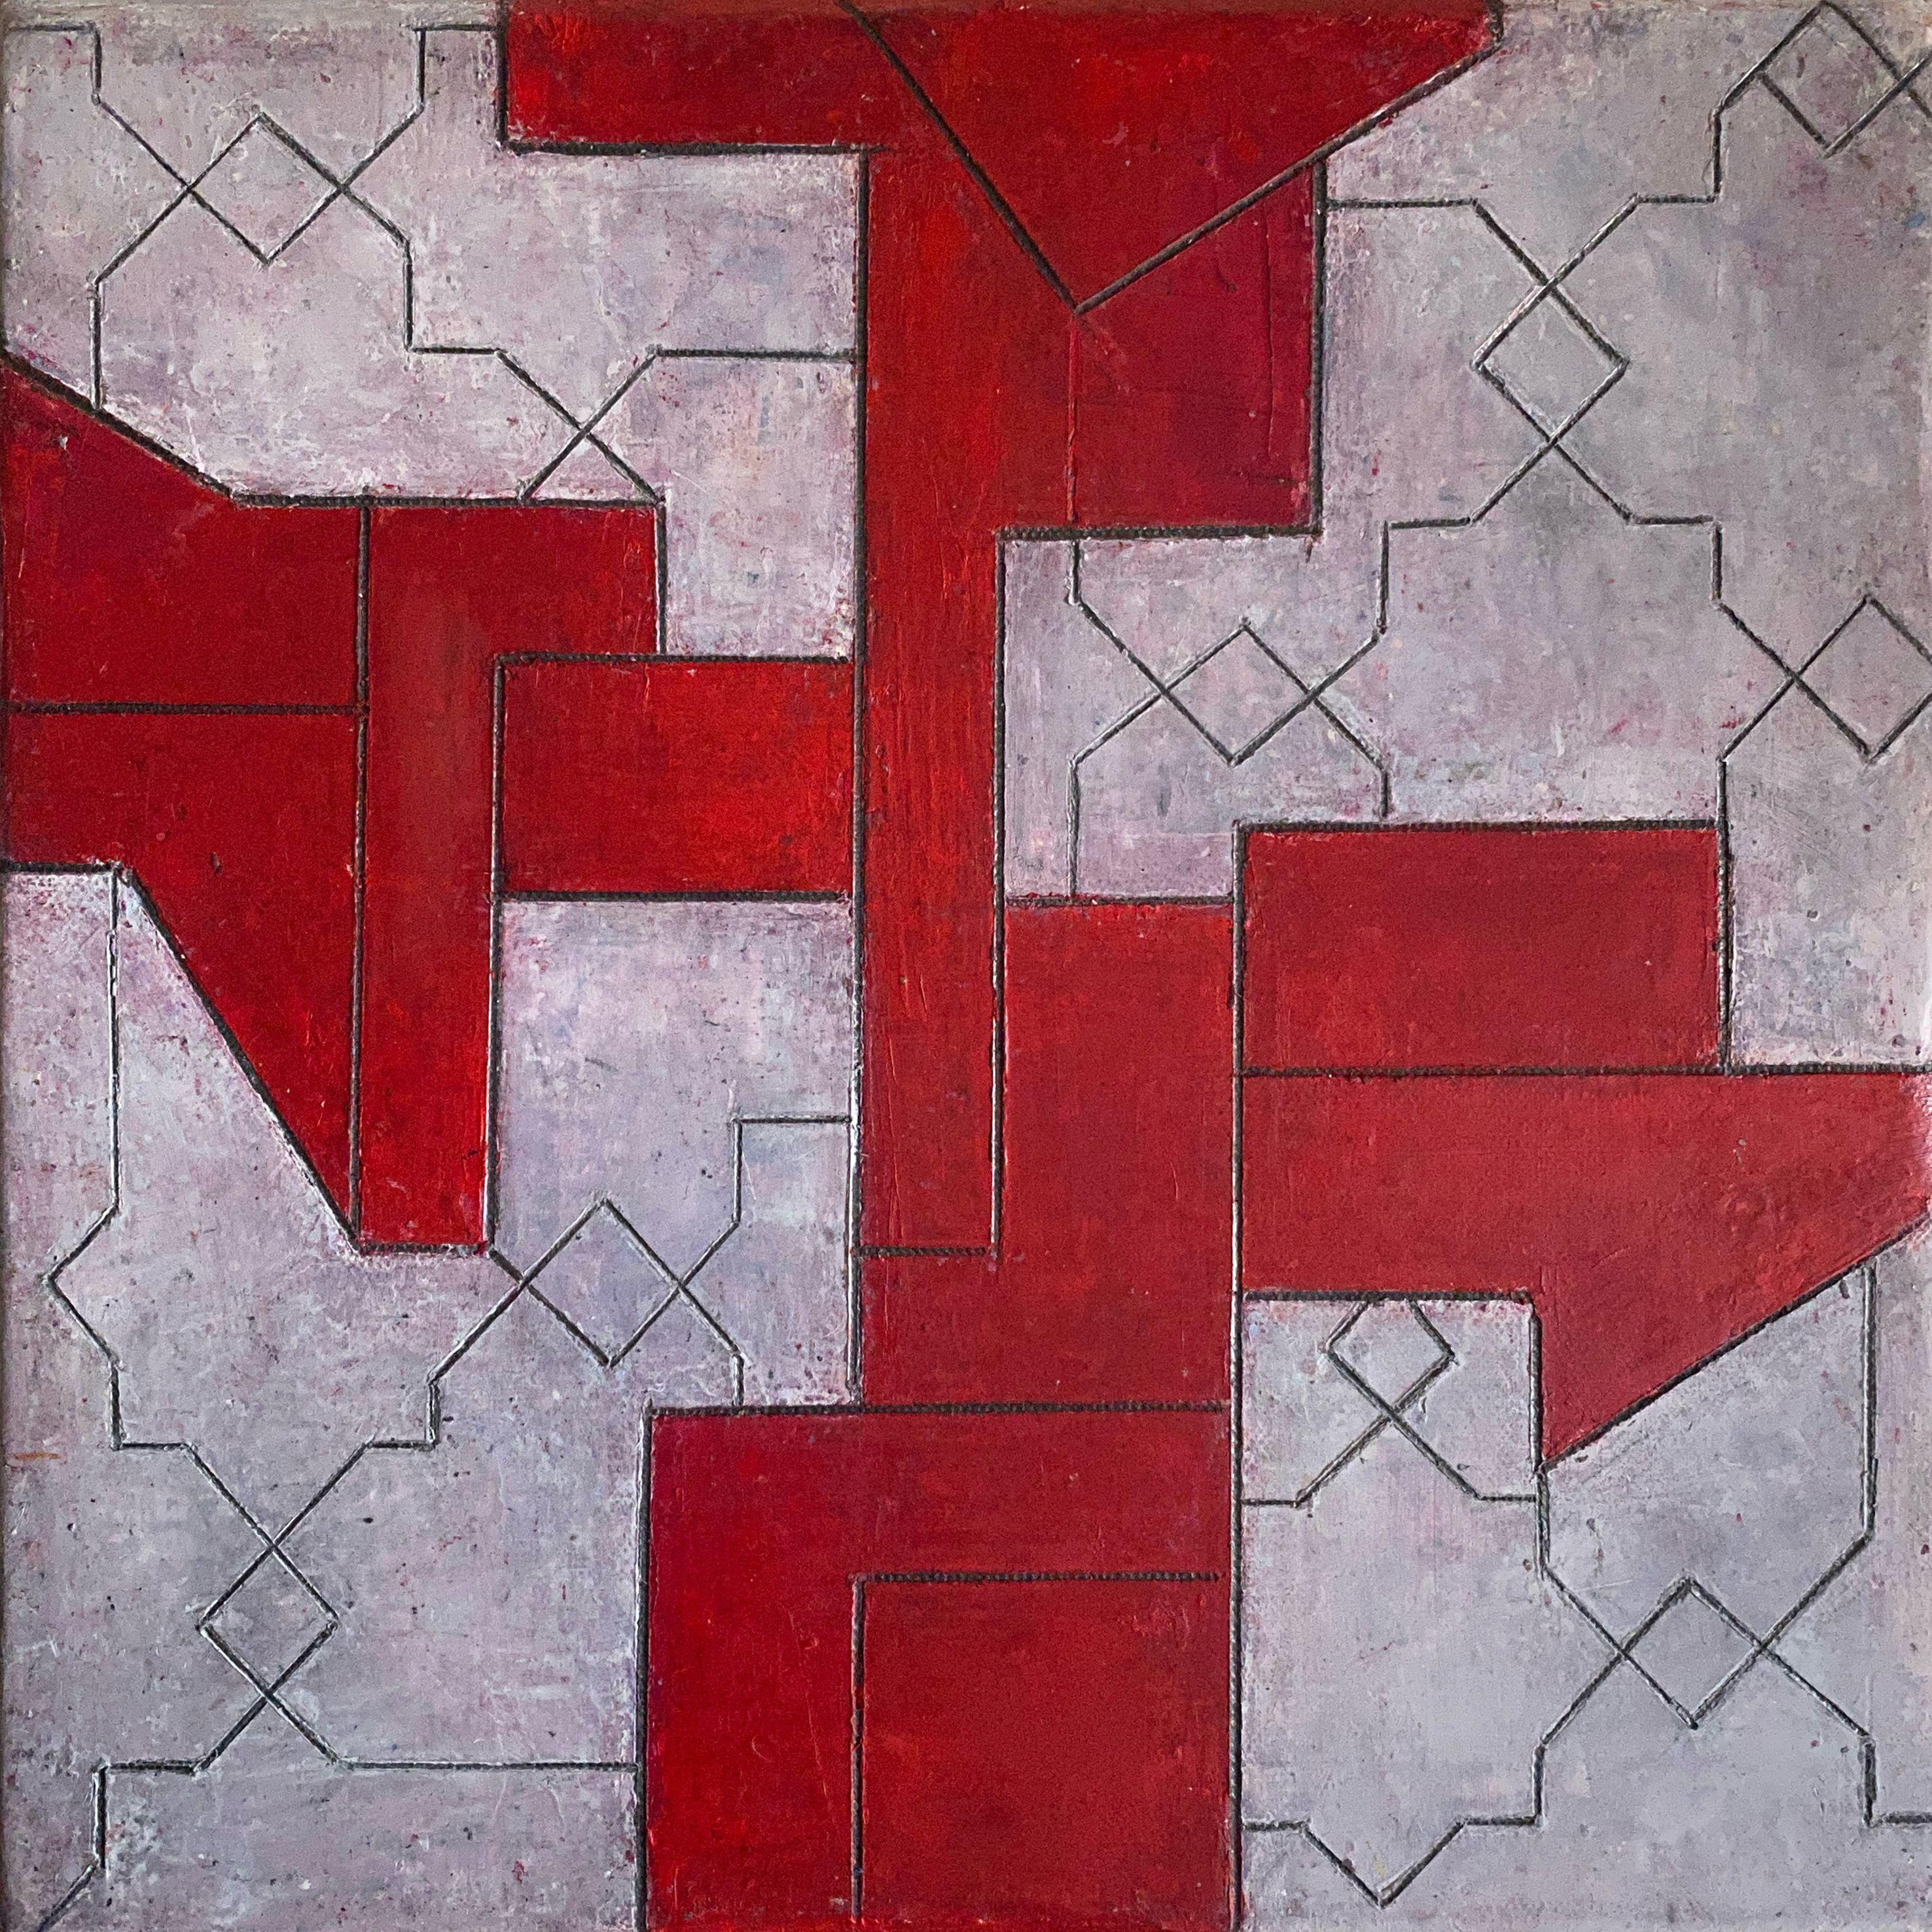 Stephen Cimini Abstract Painting - Cardinal, Painting, Oil on Canvas